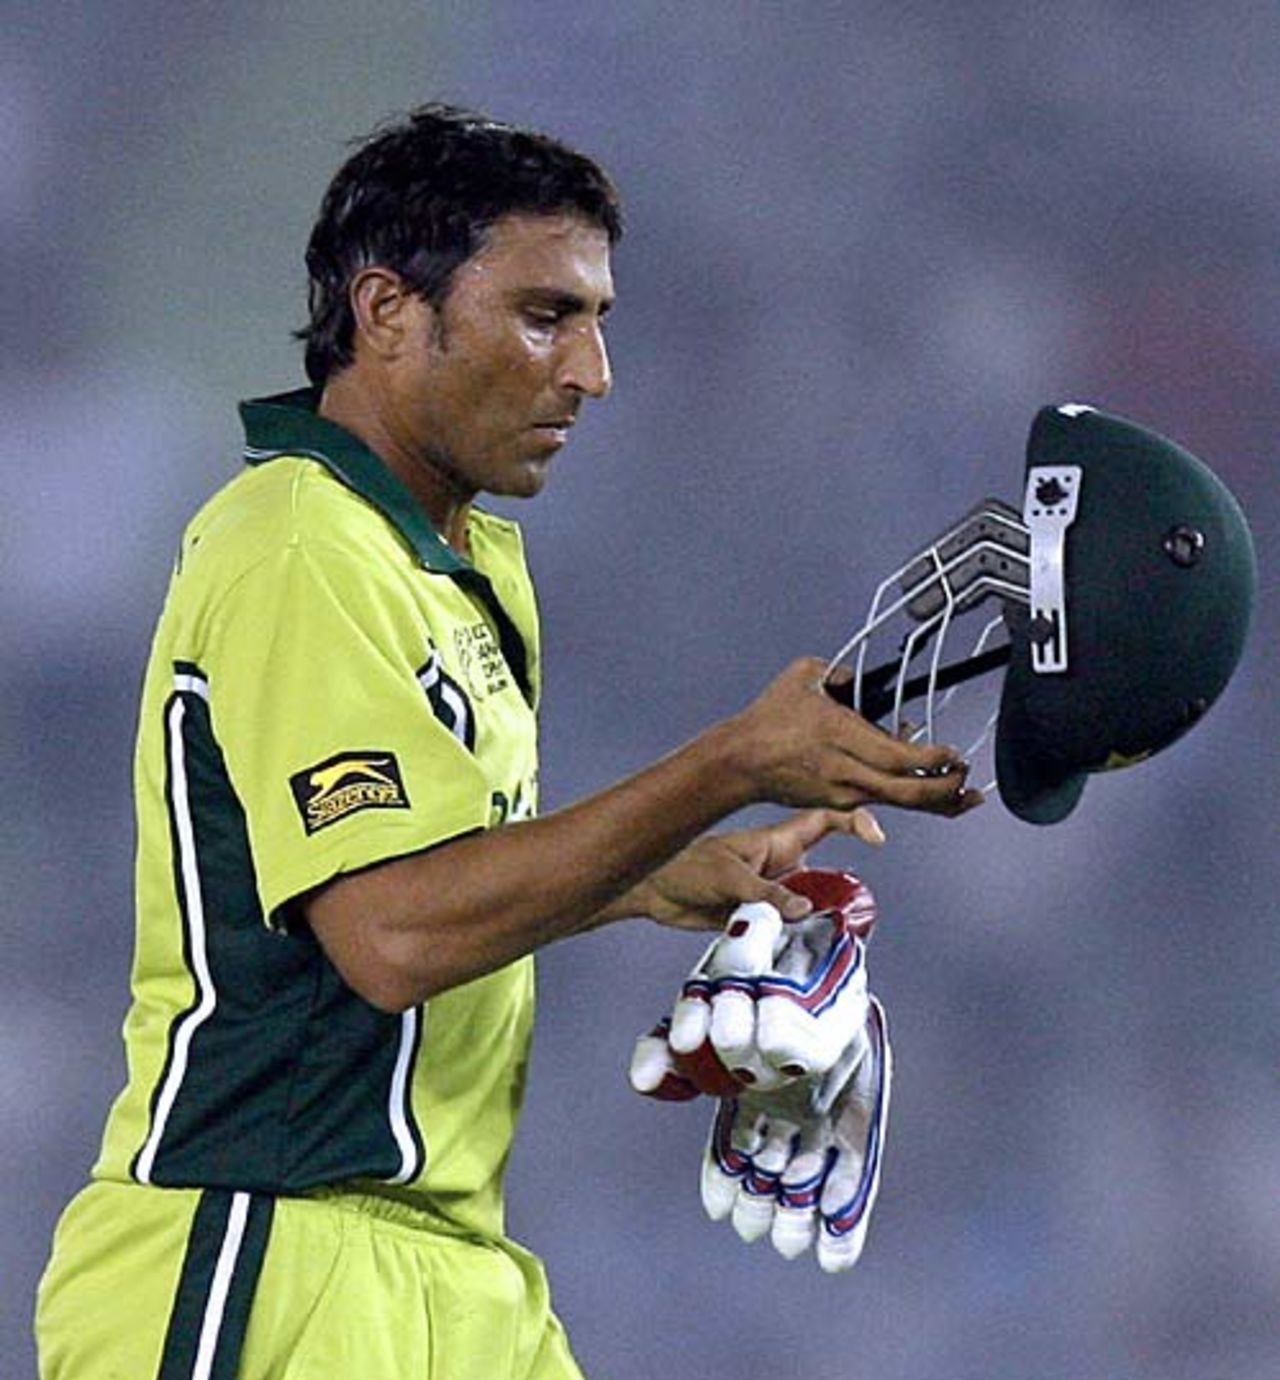 Younis Khan trudges off after being dismissed cheaply, New Zealand v Pakistan, 8th match, Mohali, Champions Trophy, October 25, 2006